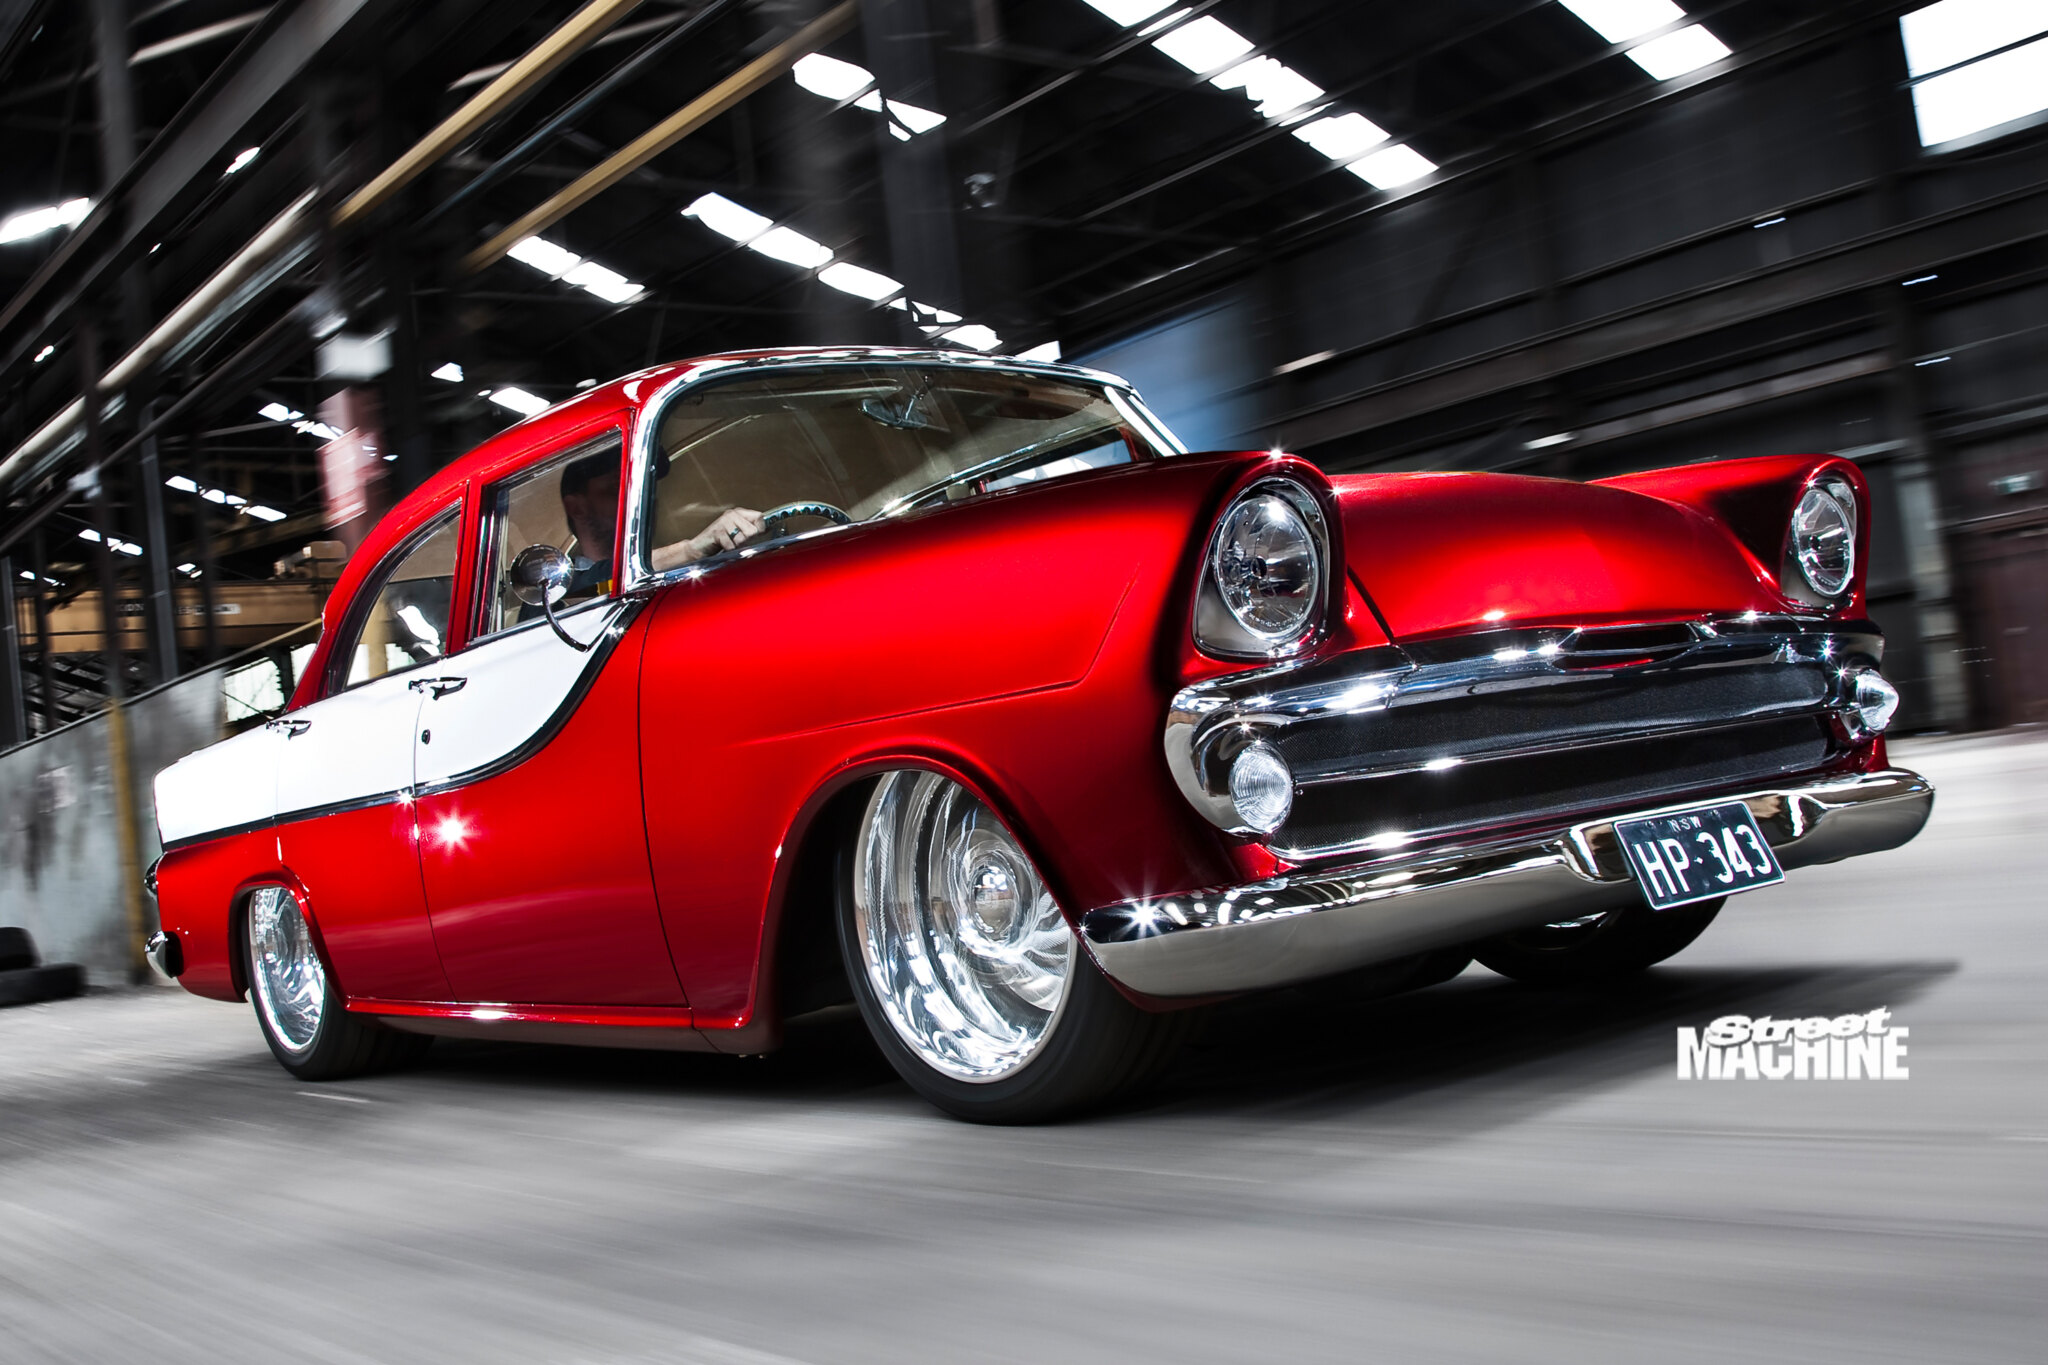 Henry Parry’s SMOTY-winning ‘Old Love’ FB Holden